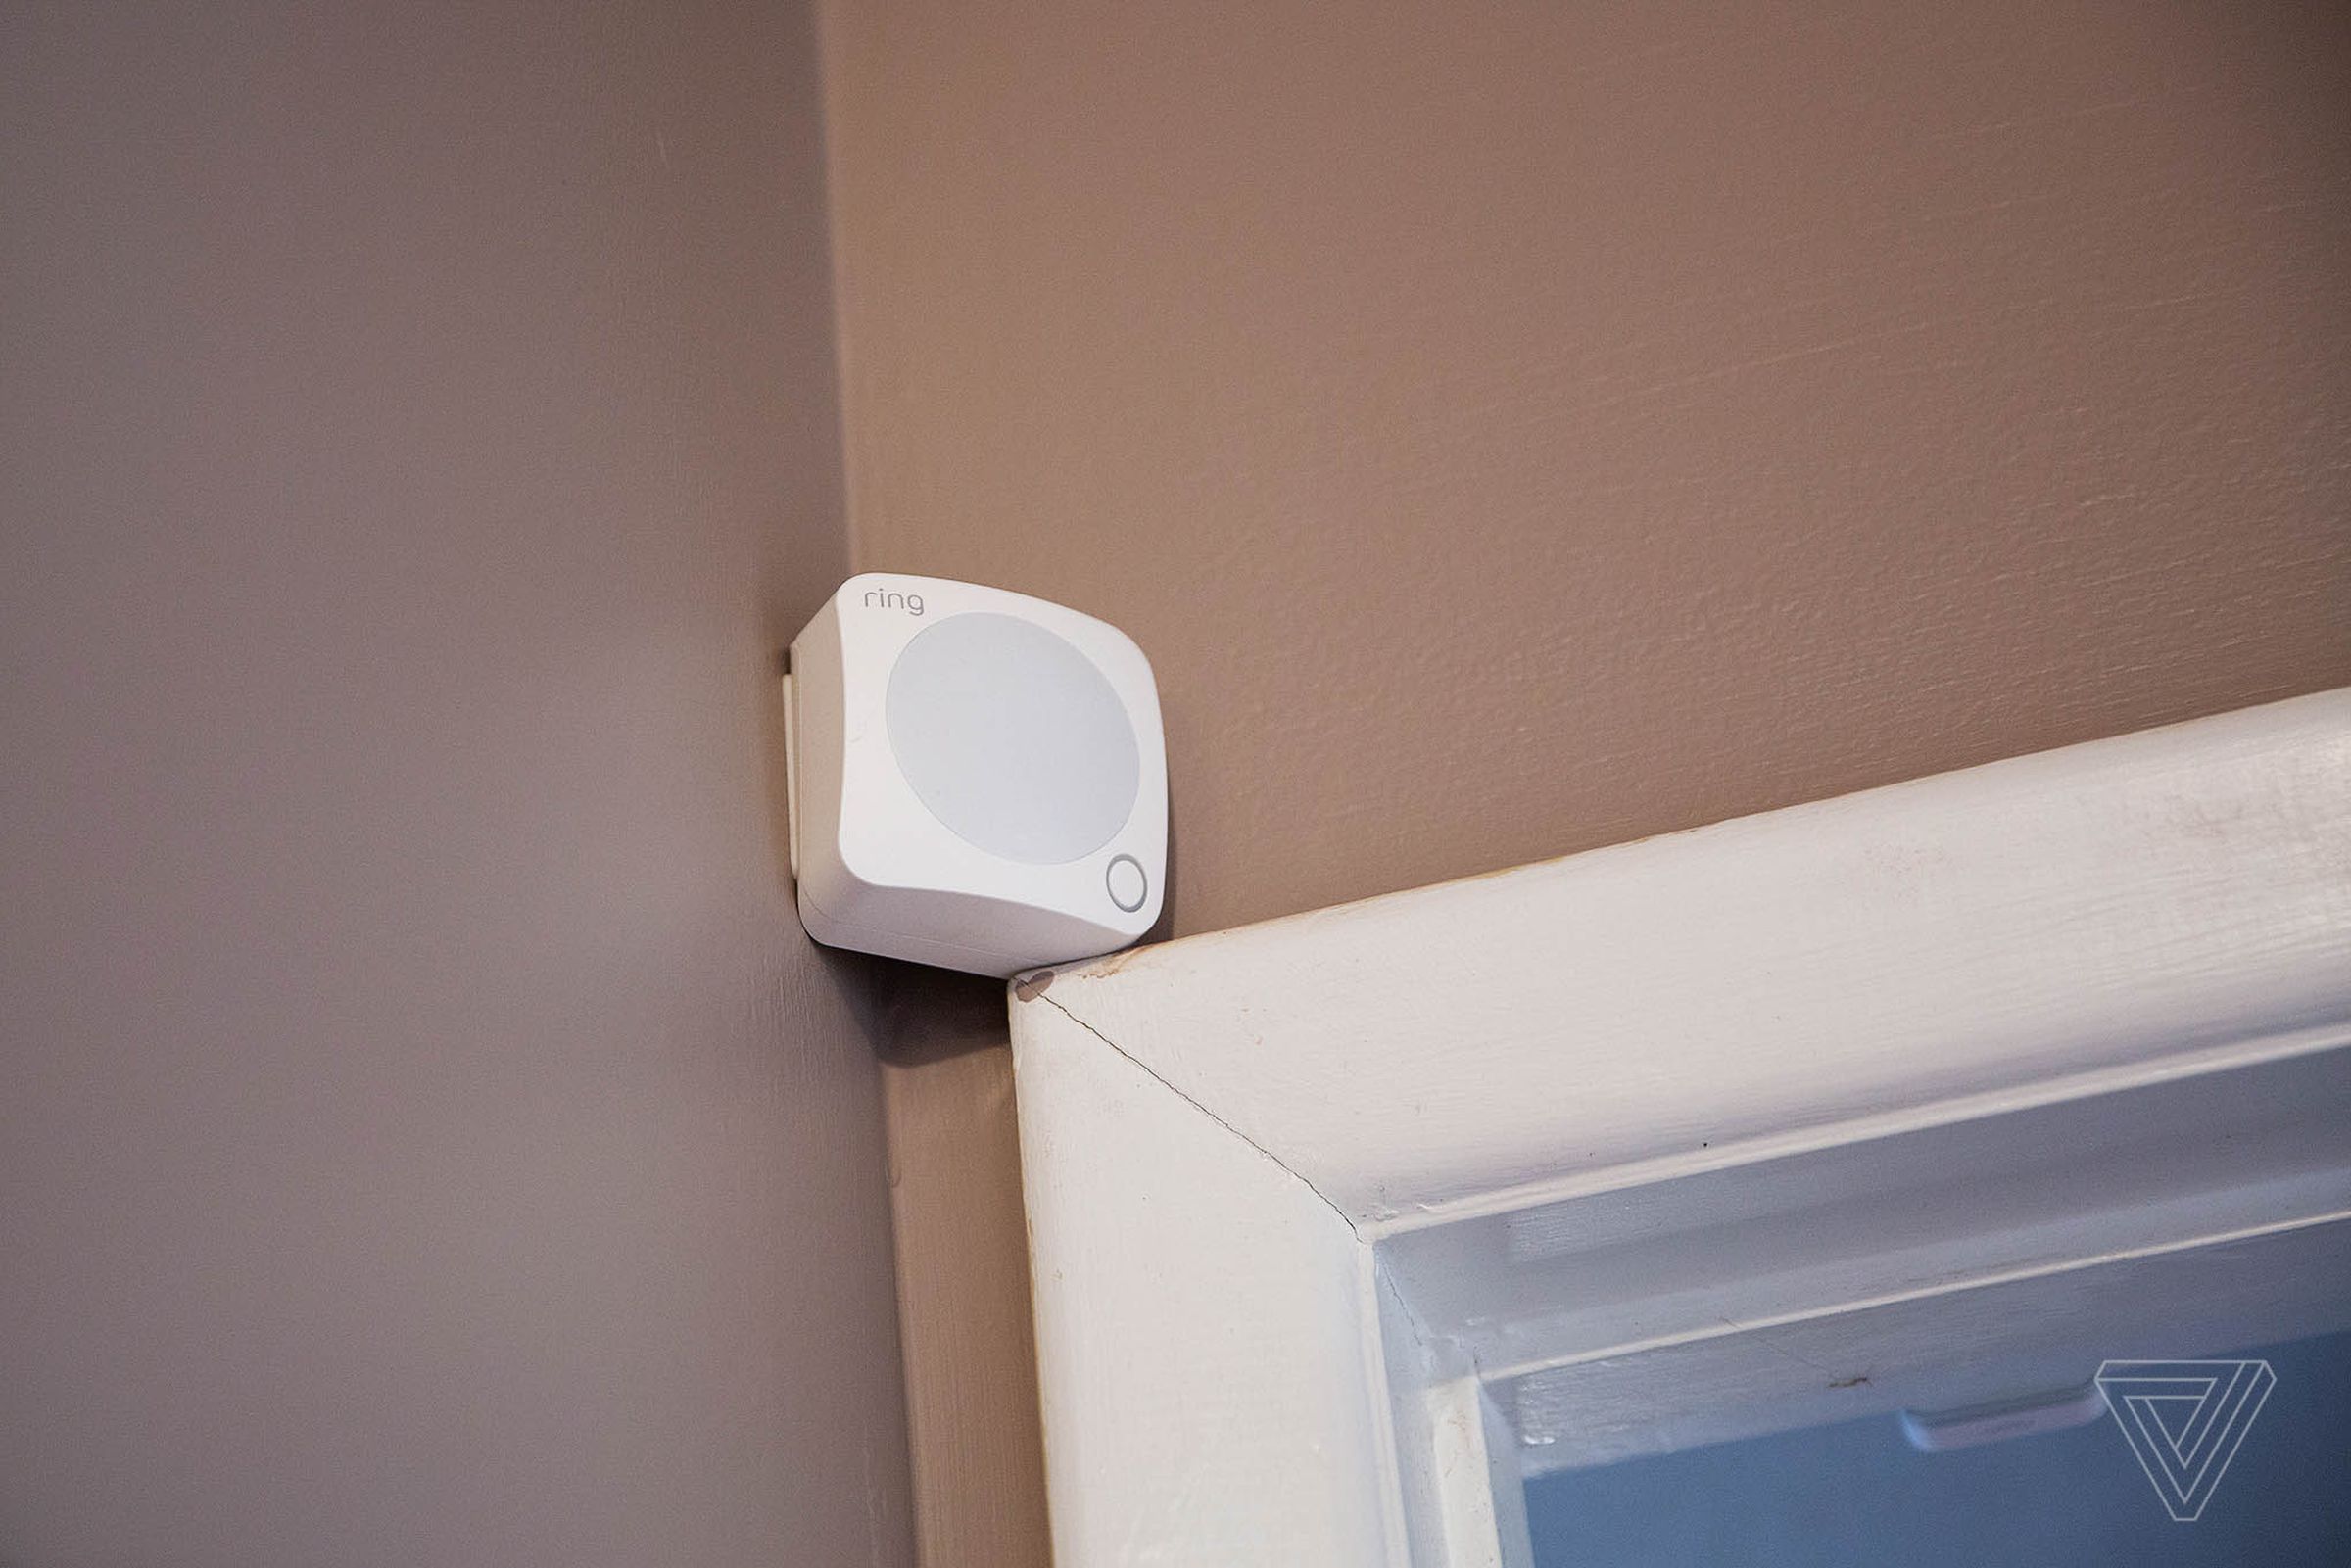 The motion sensor and contact sensor are small and unobtrusive, but the prominent Ring logo is annoying. 